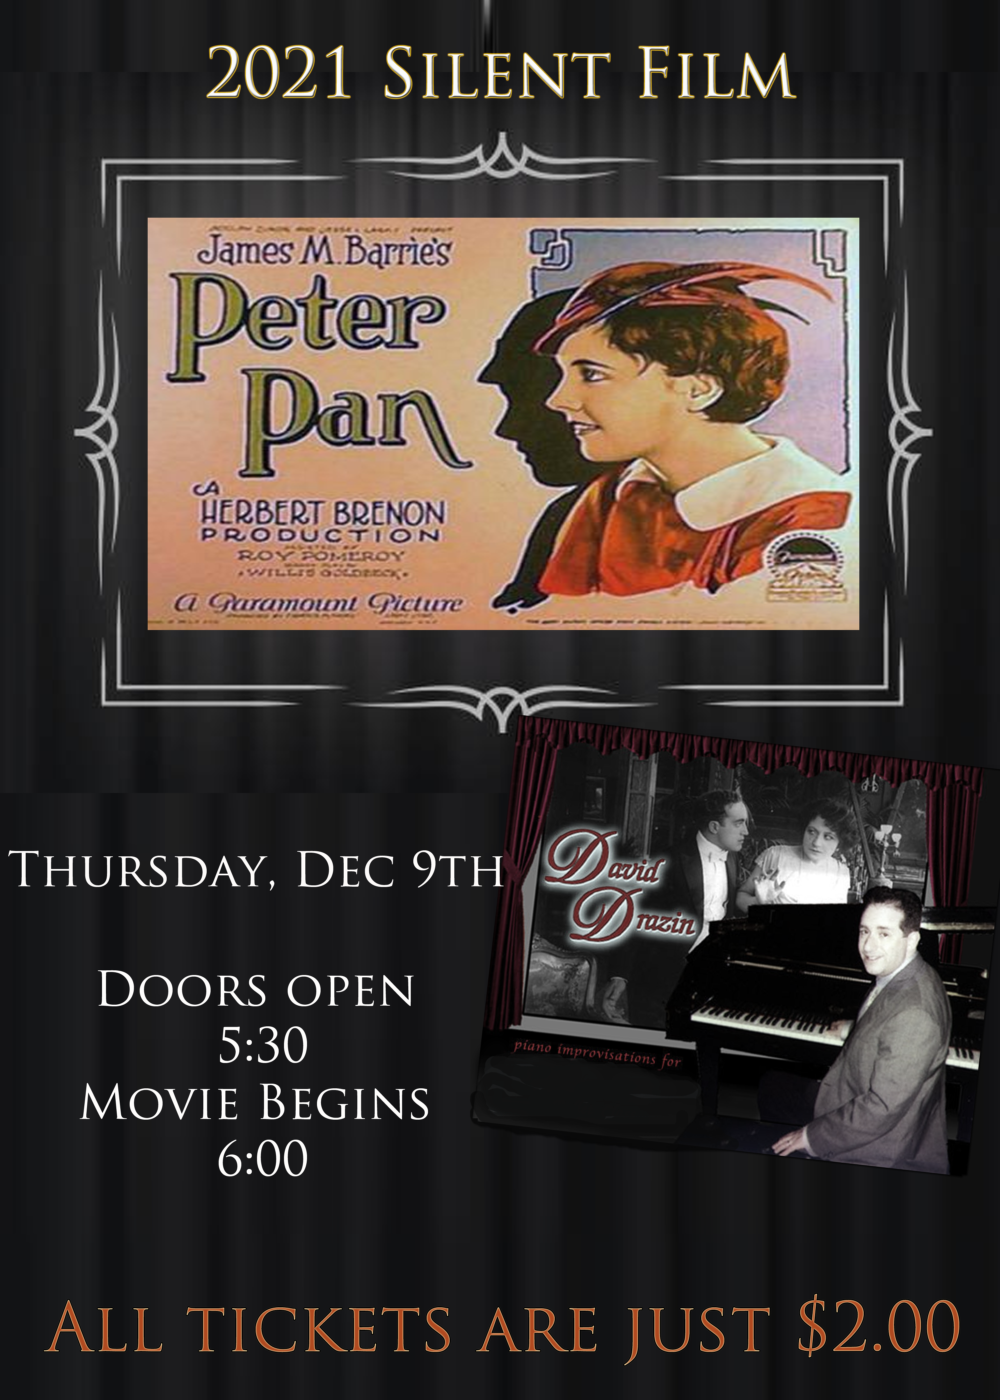 Flyer for silent film Peter Pan at Towne Cinema